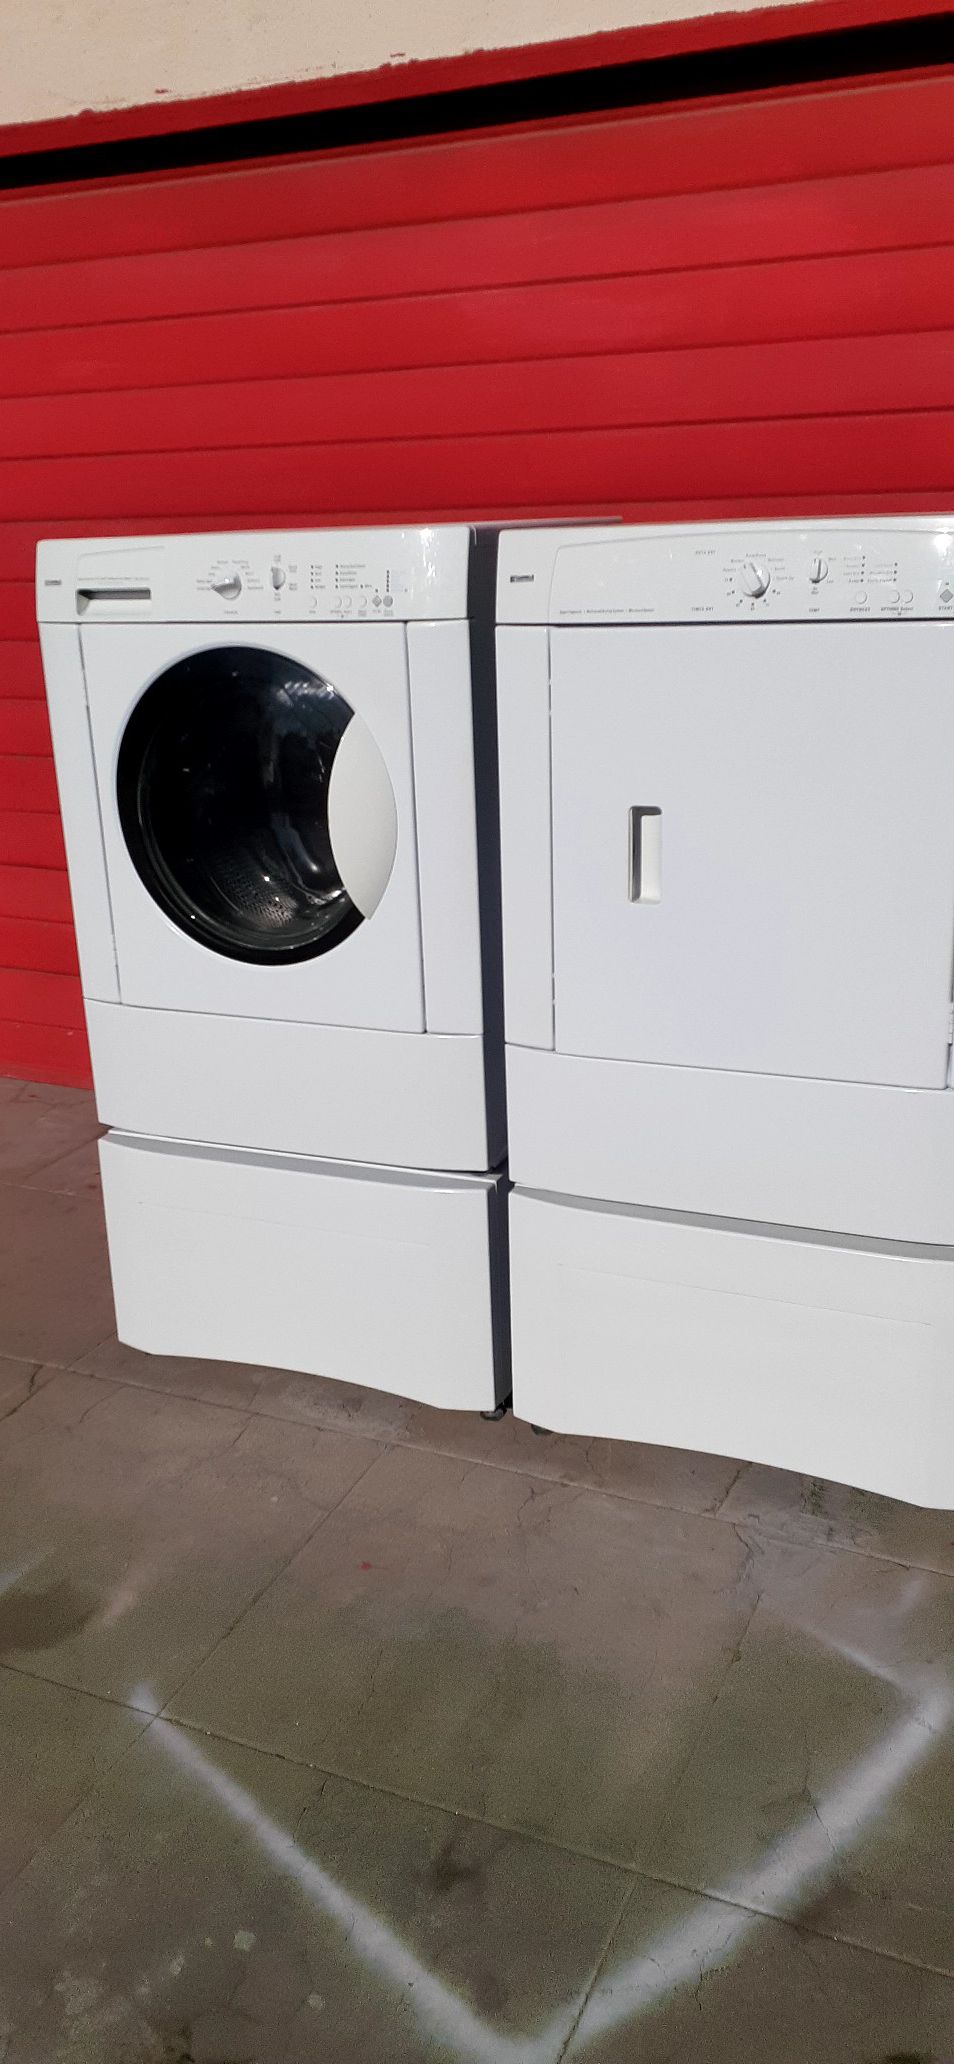 Kenmore front load washer and dryer with pedestals